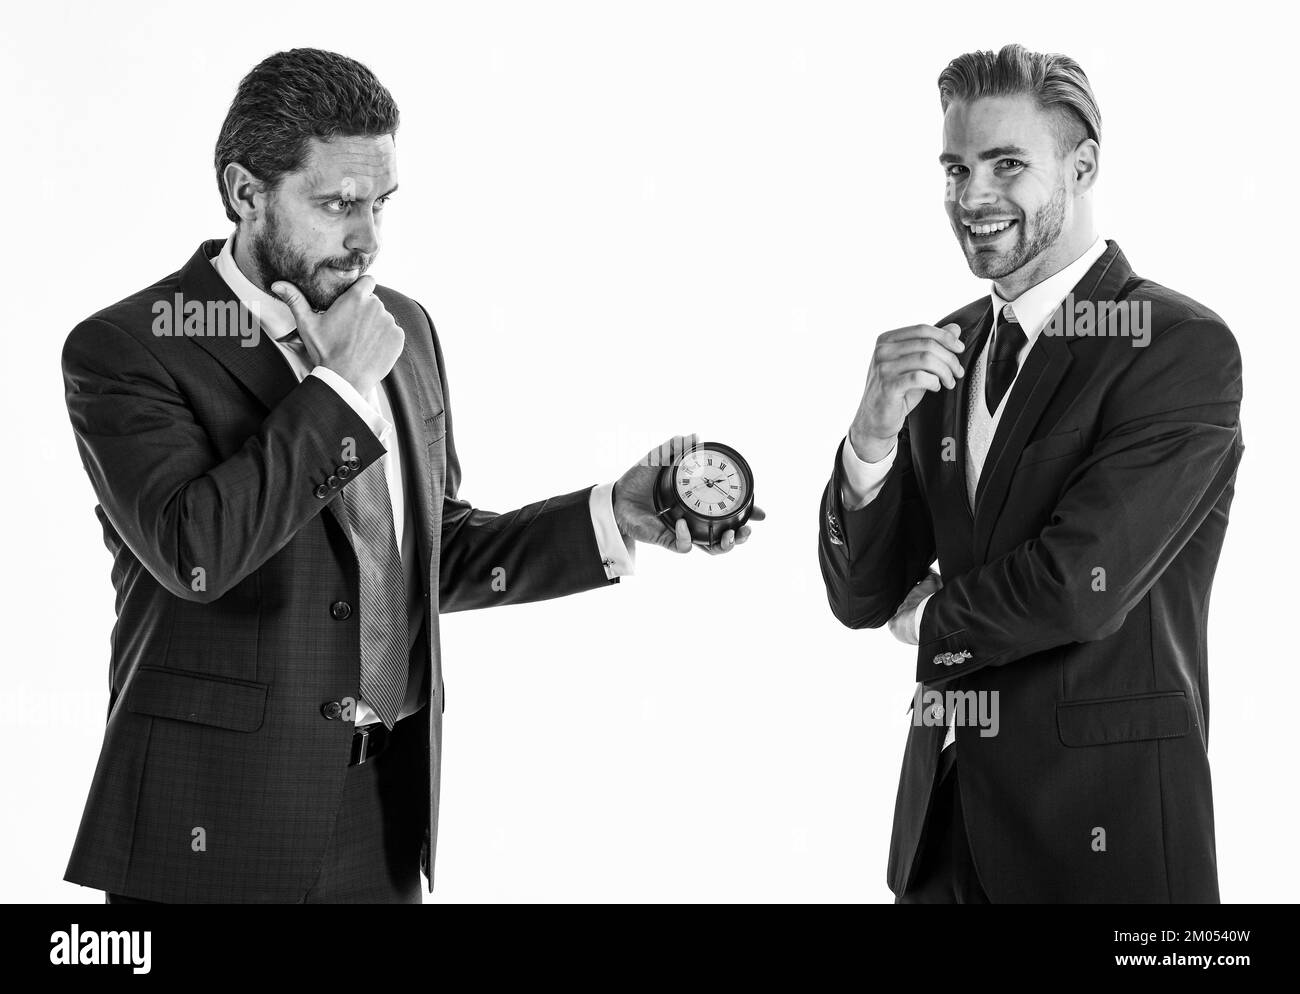 Business and punctuality concept. Businessmen misunderstanding a Stock Photo